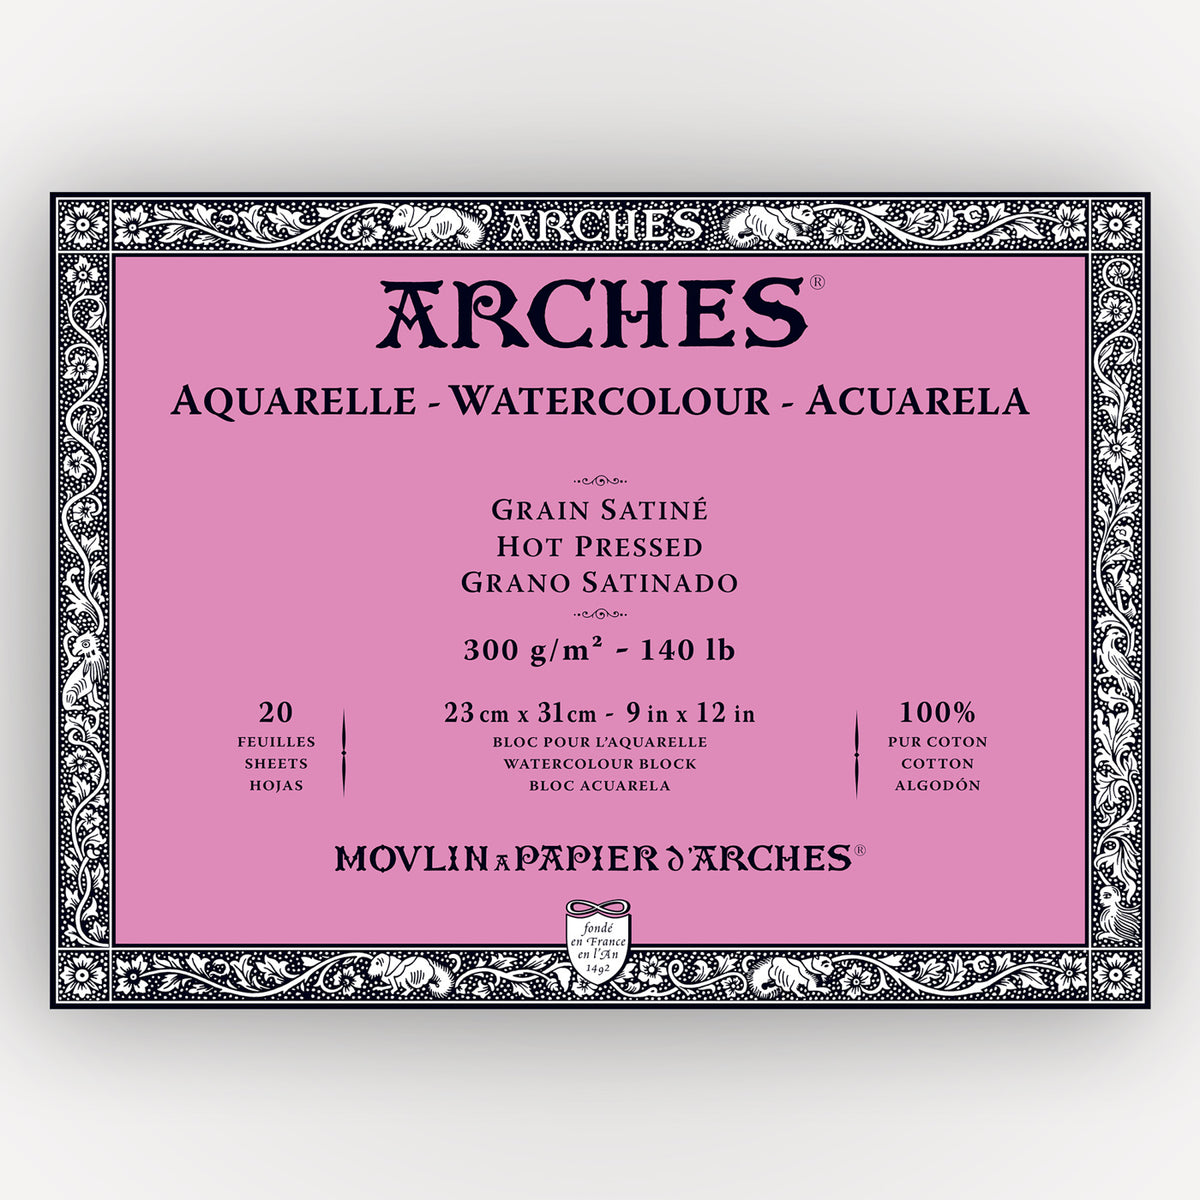 Arches Hot Pressed 300g 23x31cm 20 sheets